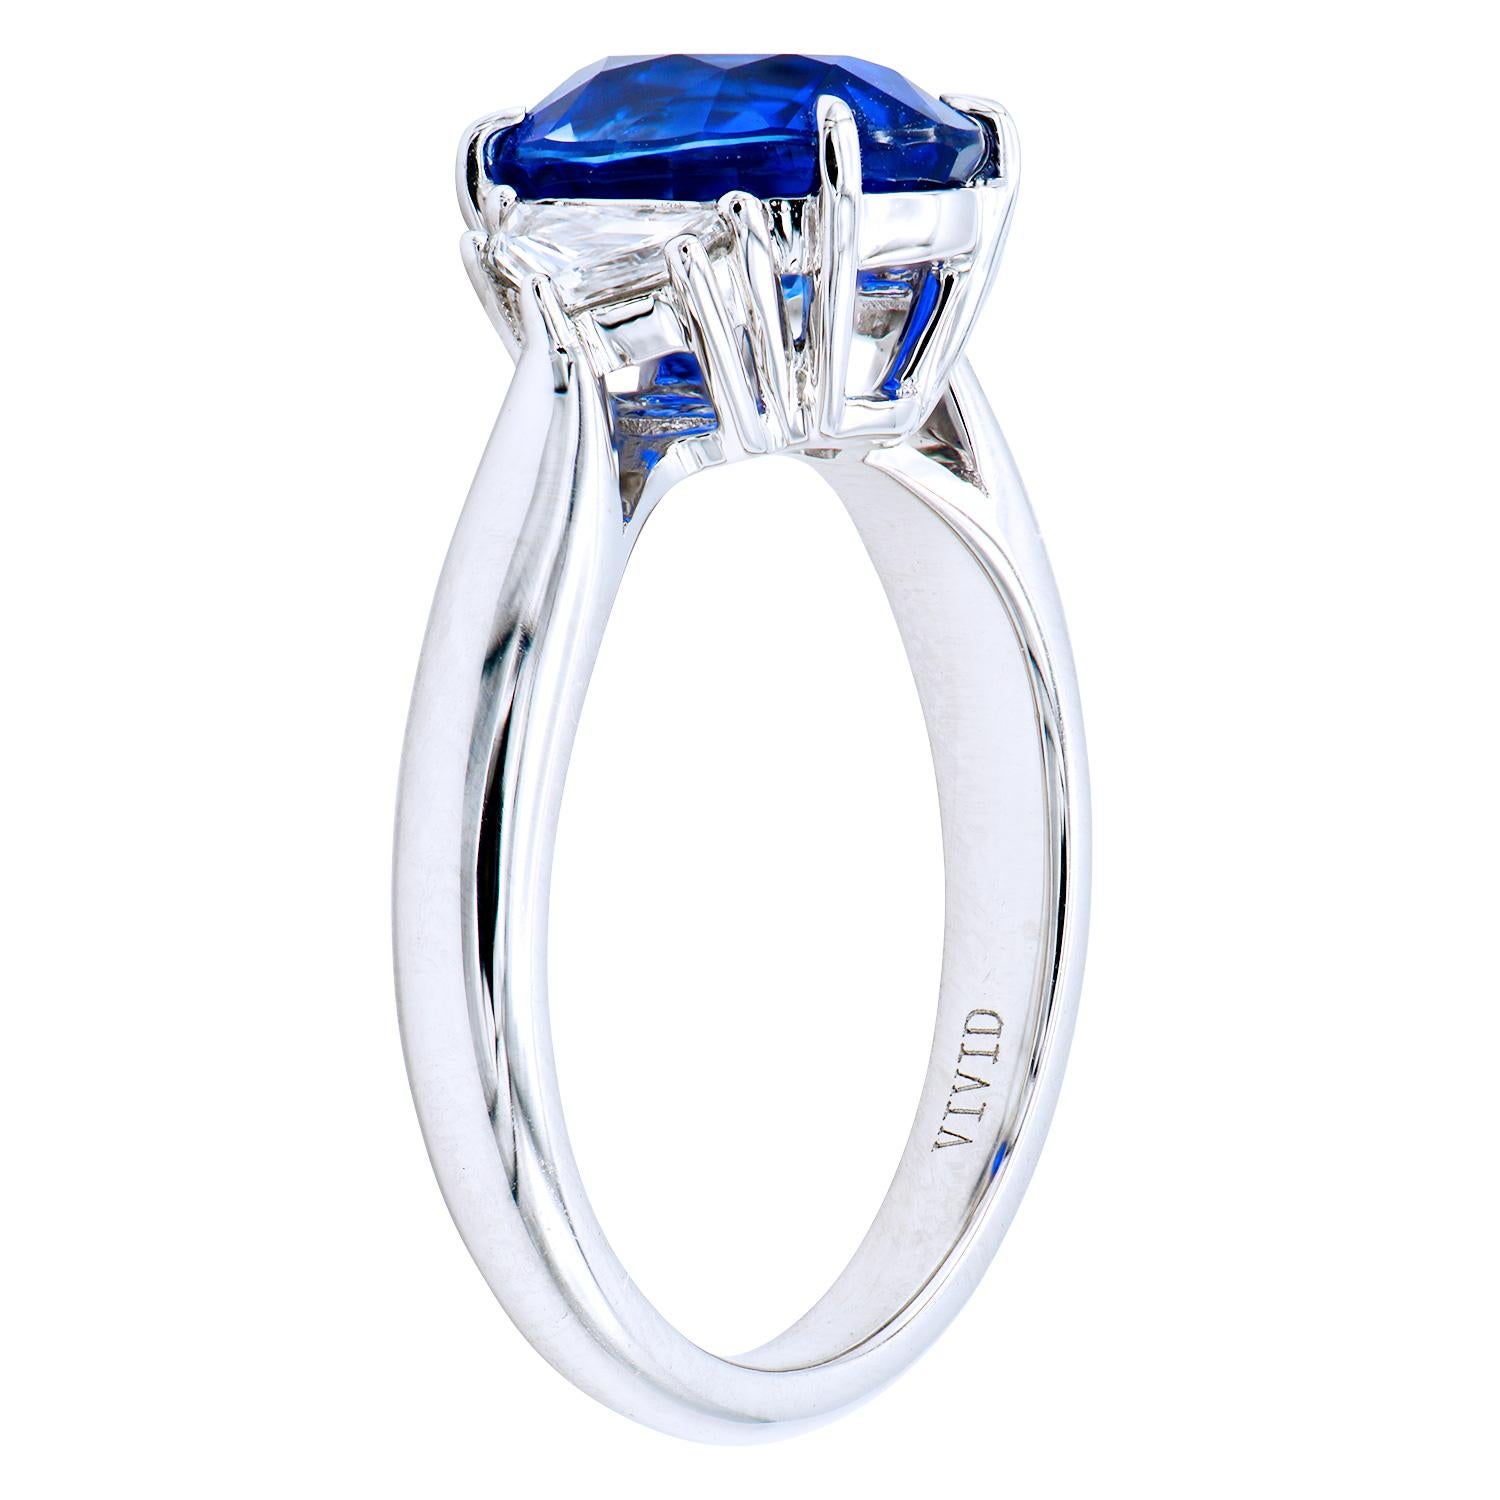 This stunning three-stone ring has a 3.01 carat oval Ceylon Blue Sapphire in the center which is set in between 2 diamond epaulets totaling 0.32 carats. The ring is made from 4.8 grams of 18 karat white gold and is a size 6.5.